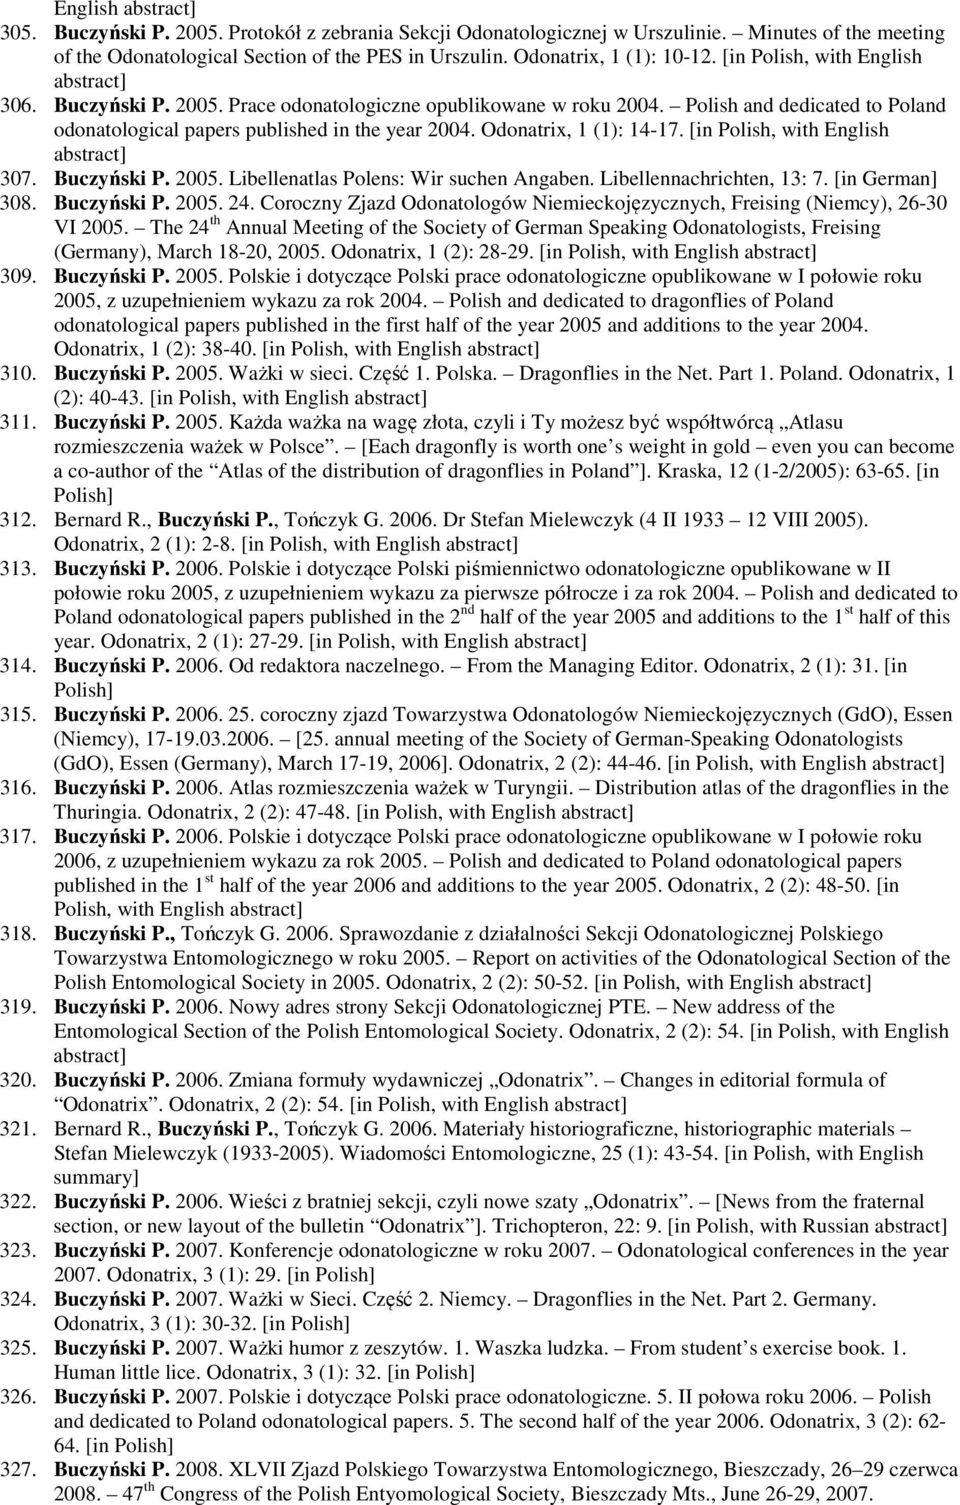 Polish and dedicated to Poland odonatological papers published in the year 2004. Odonatrix, 1 (1): 14-17. [in Polish, with English abstract] 307. Buczyński P. 2005.